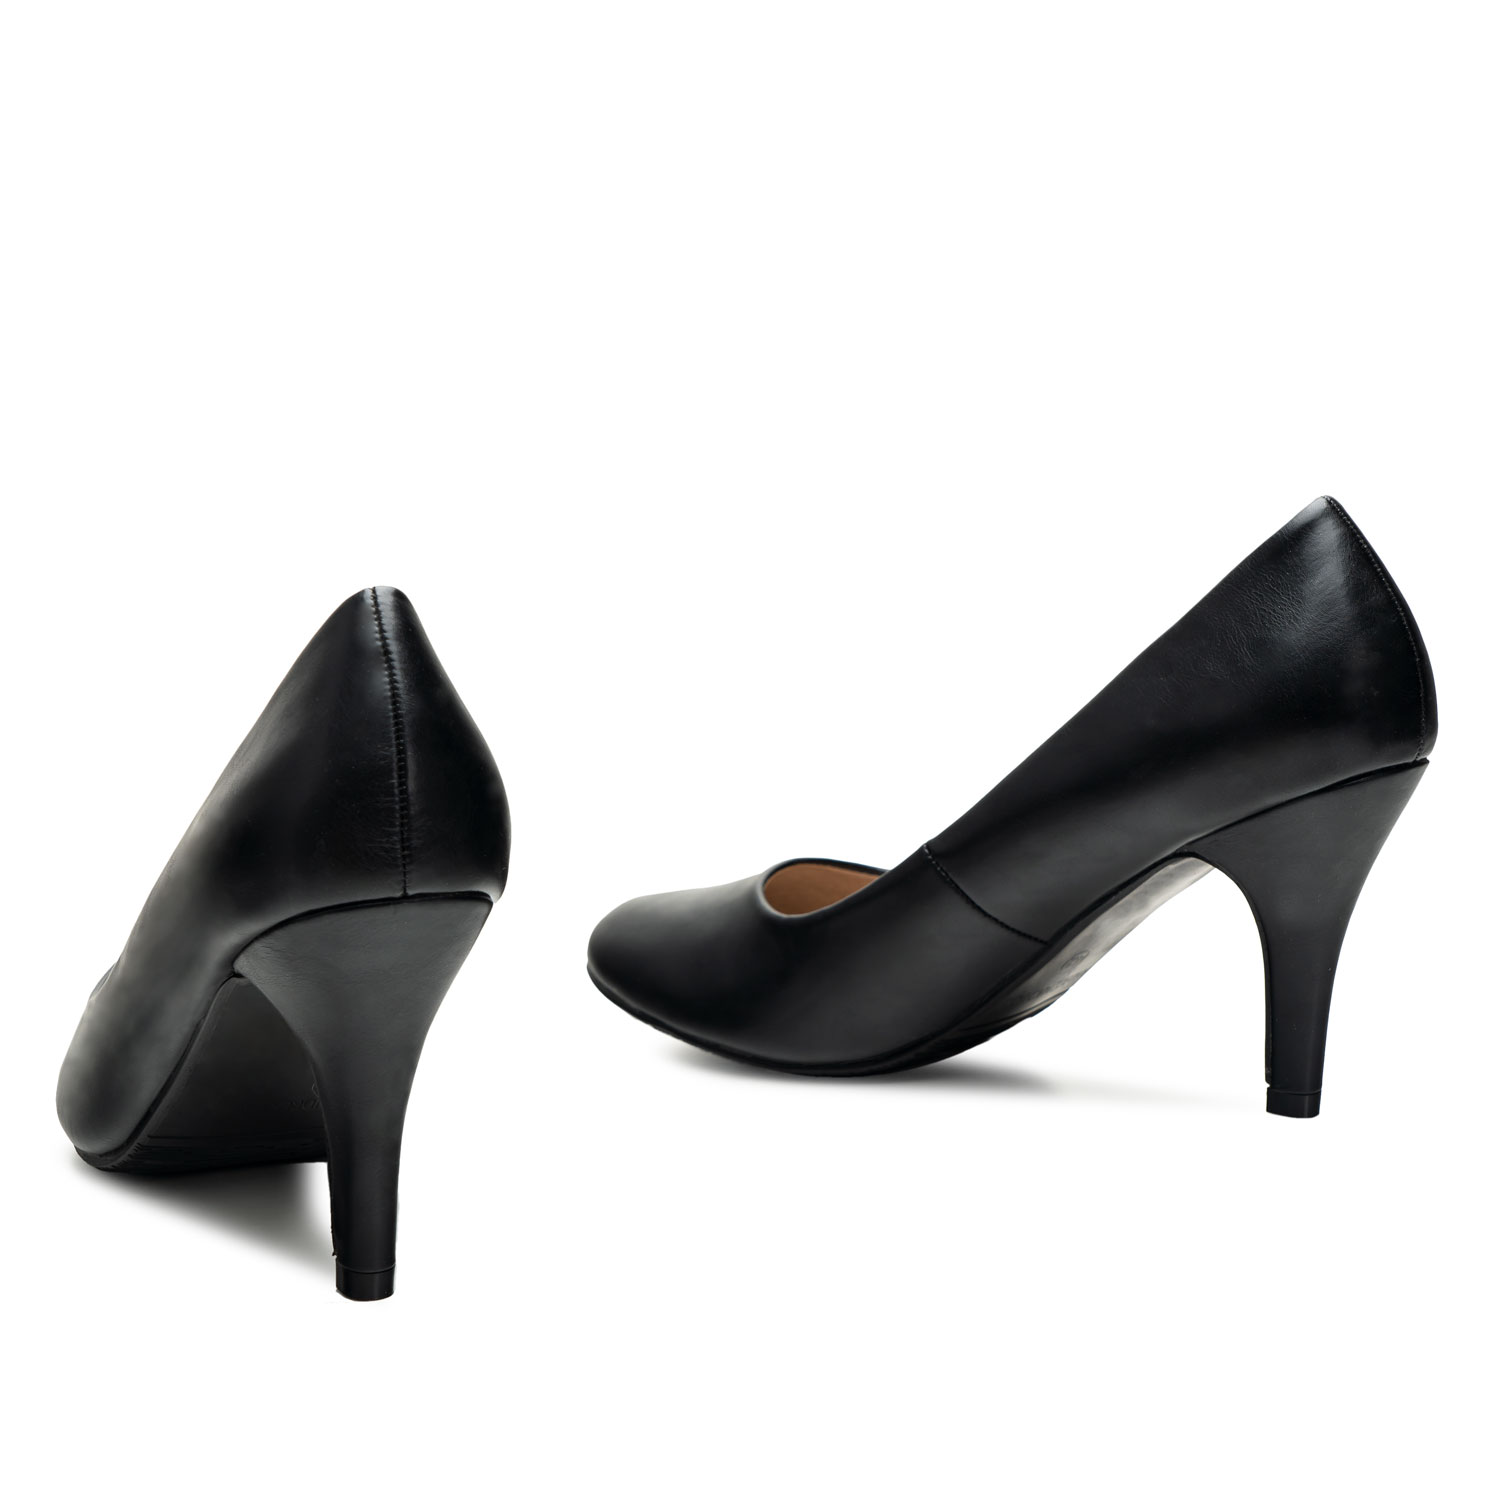 Retro High Heel Pumps in Black faux Leather 